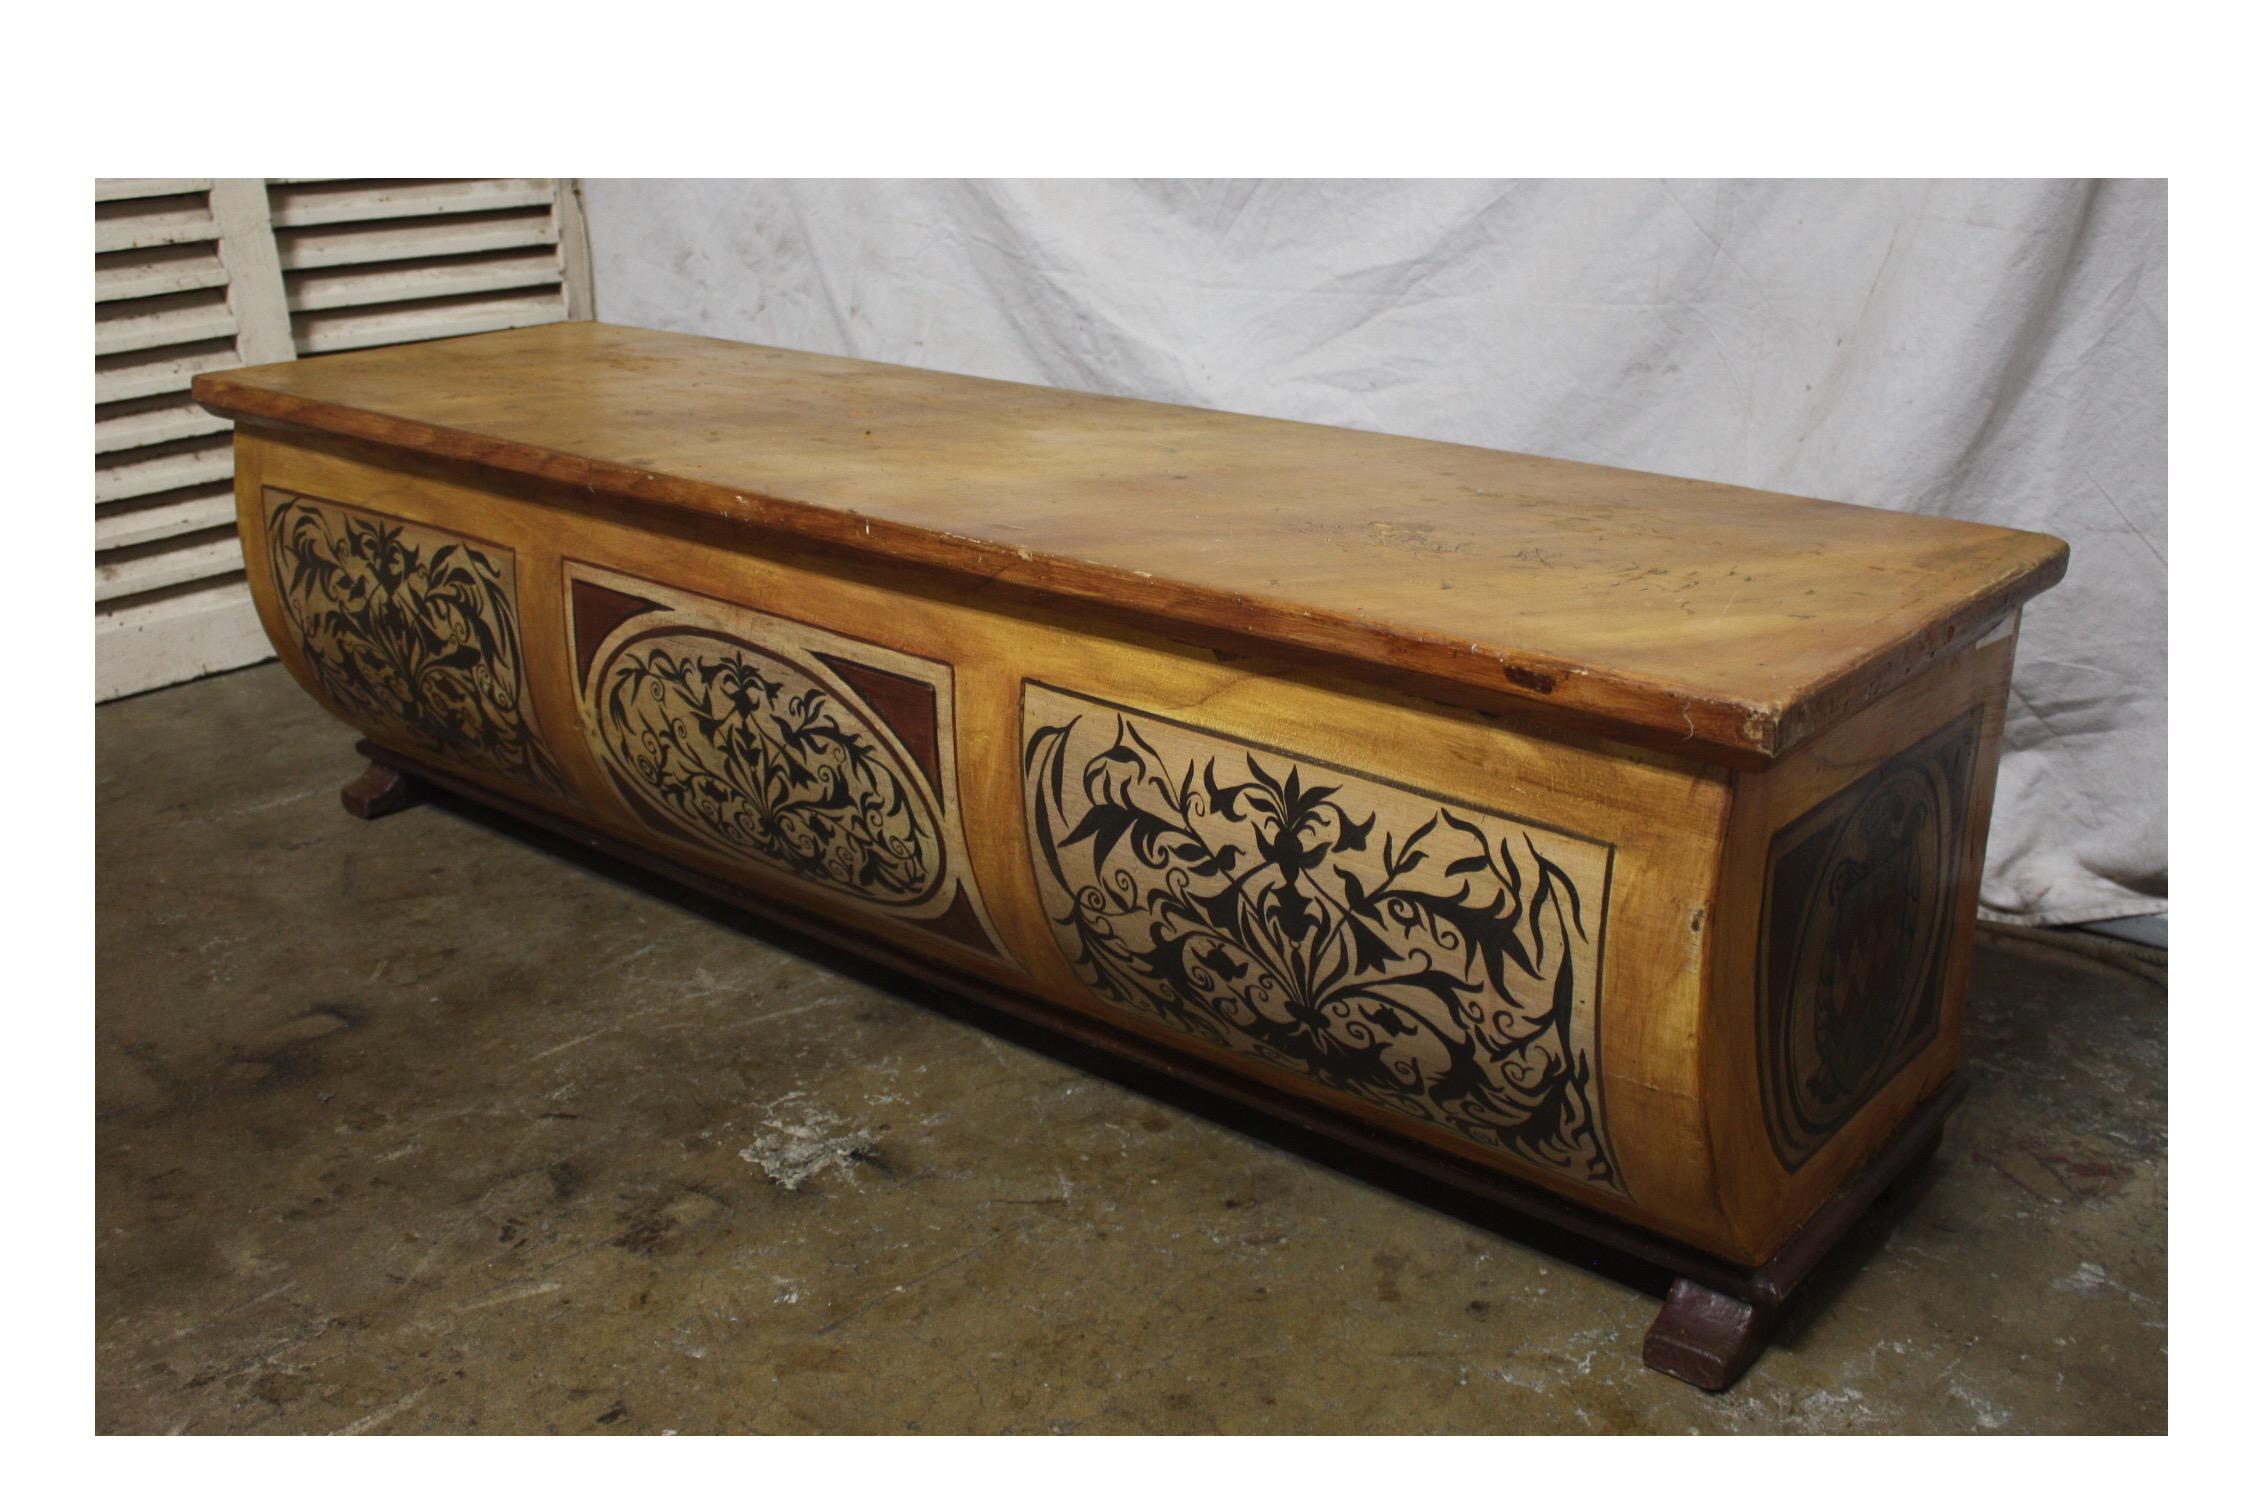 Early 20th century French bench trunk.